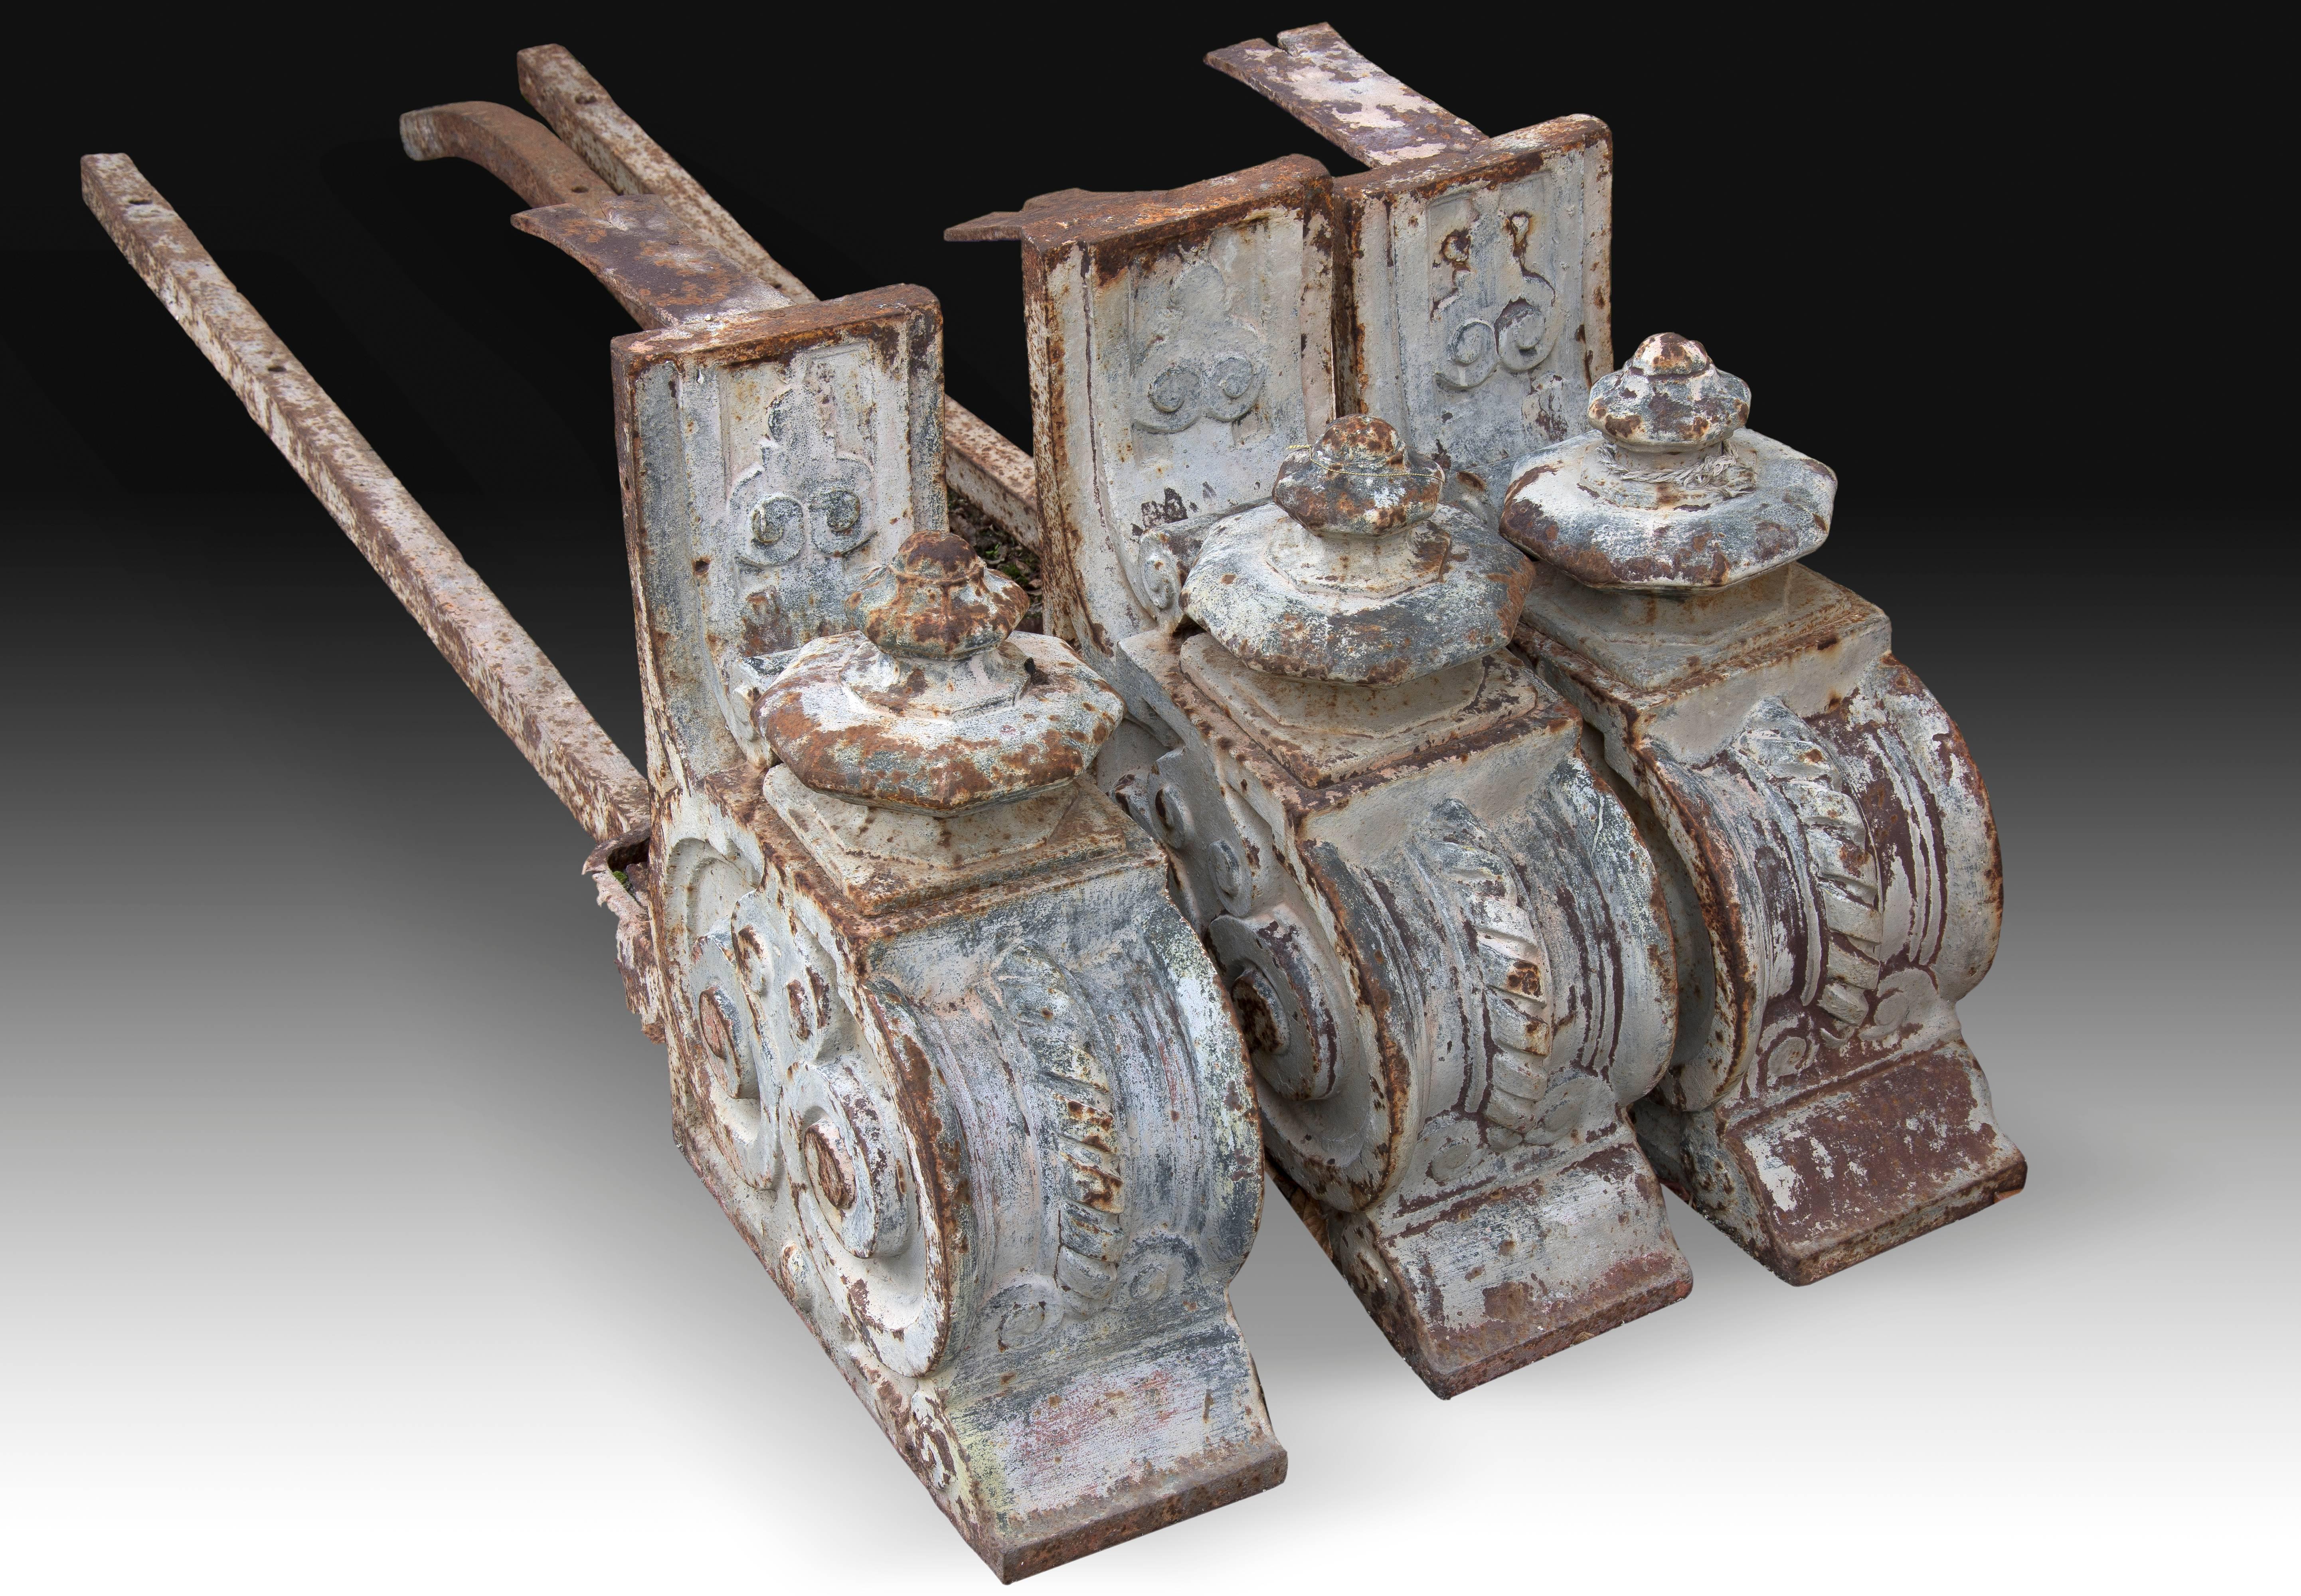 Set of three iron corbels used in some outstanding residence, decorated with scrolls, lines and other elements that could link the pieces with neoclassicism, but also have a somewhat more modern look. The polygonal finials located under the two